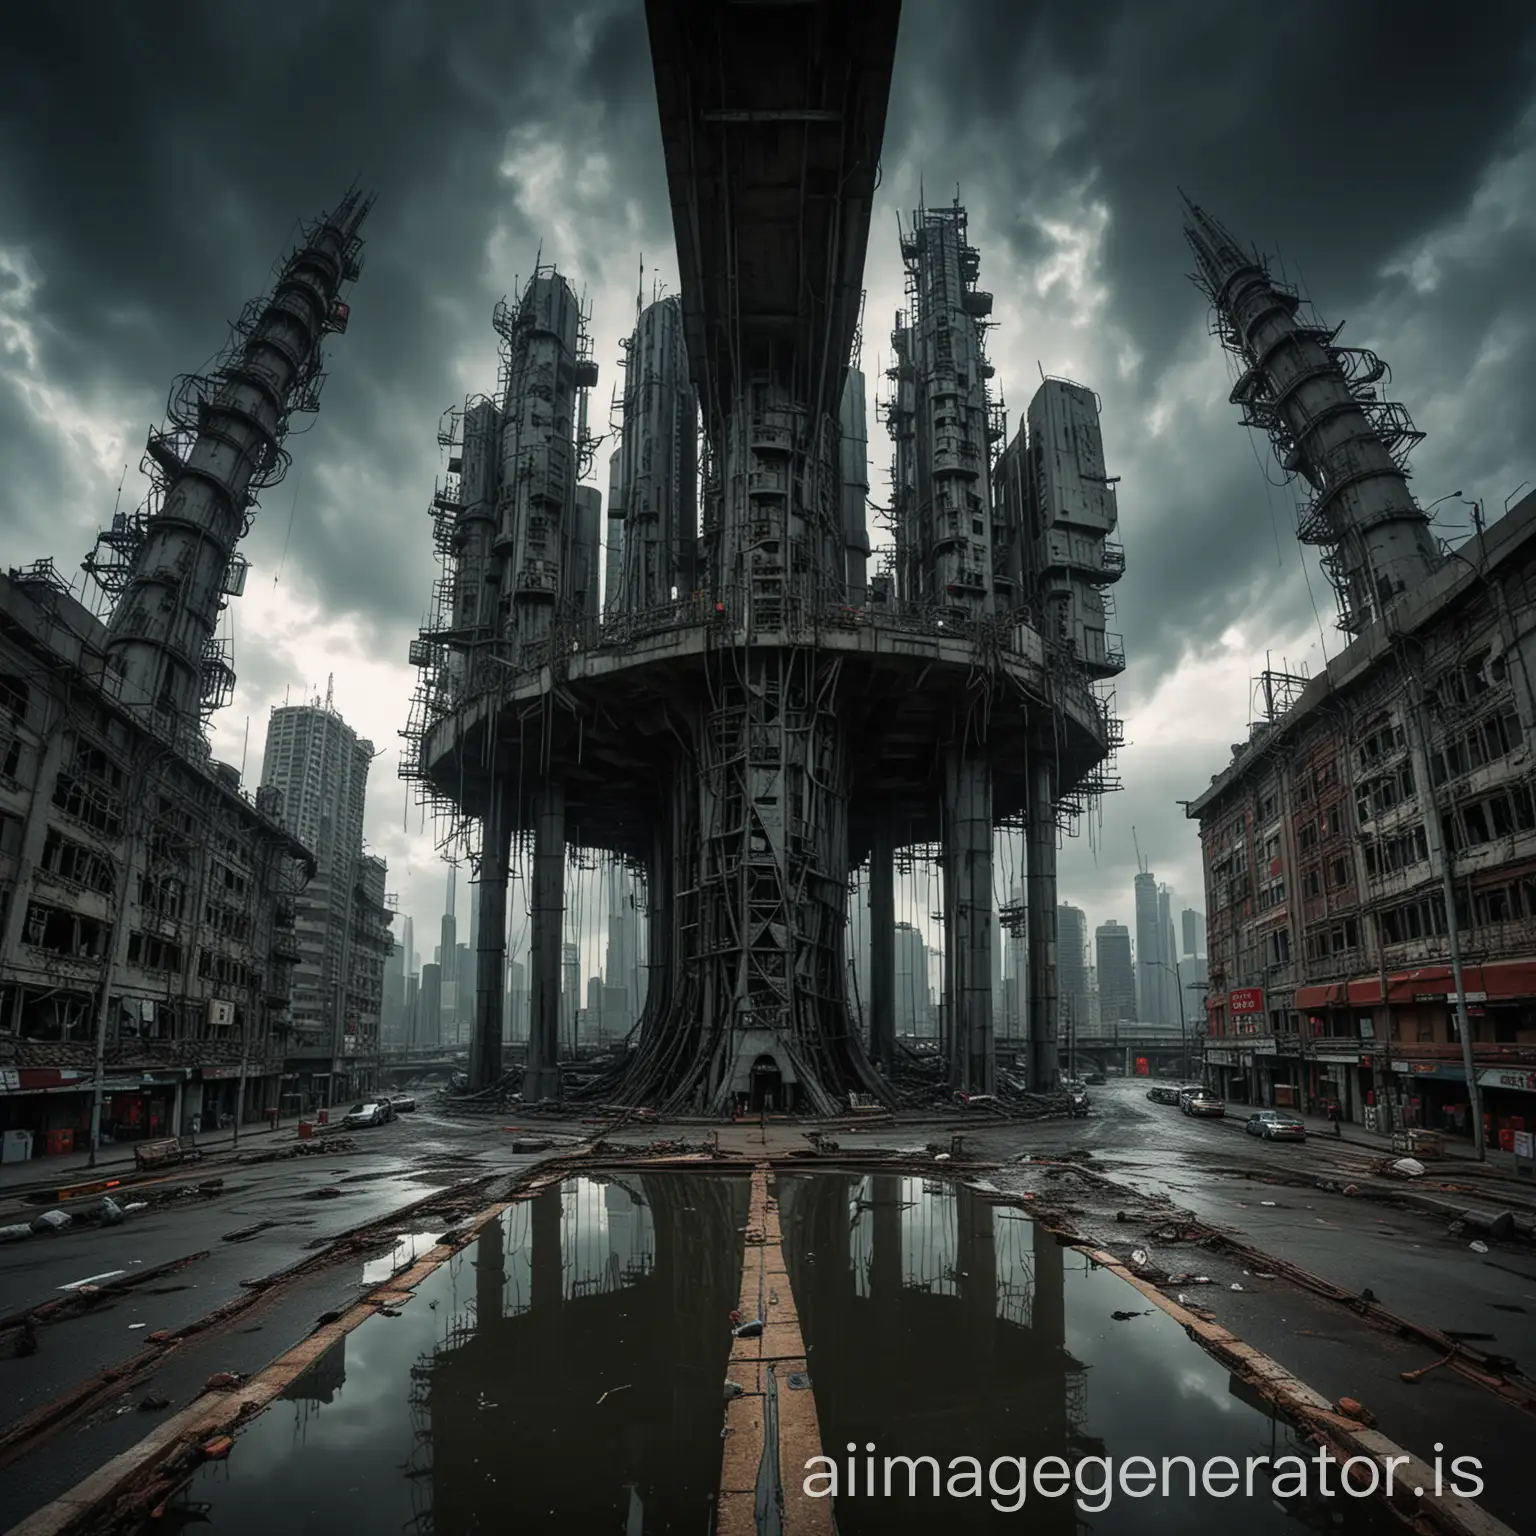 A mesmerizing and unnerving futuristic cityscape captured through a fish-eye lens that exudes a necrosurreal ambiance. A towering man-faced trapezoidal structure casts a shadow over the city, adorned with aquasuiton bolts and tubes. The city's architecture is a fusion of concrete constructions, entwined with vividly colored petrochemical distillation columns. The atmosphere is taut with tension, as black clouds shroud the sky like a dark veil. The photograph utilizes advanced techniques such as the PL filter, Ray Tracing Global Illumination, Optics, Scattering, and Glow effects to achieve an extraordinary level of detail and realism, pushing the boundaries of reality and teetering on the brink of insanity.